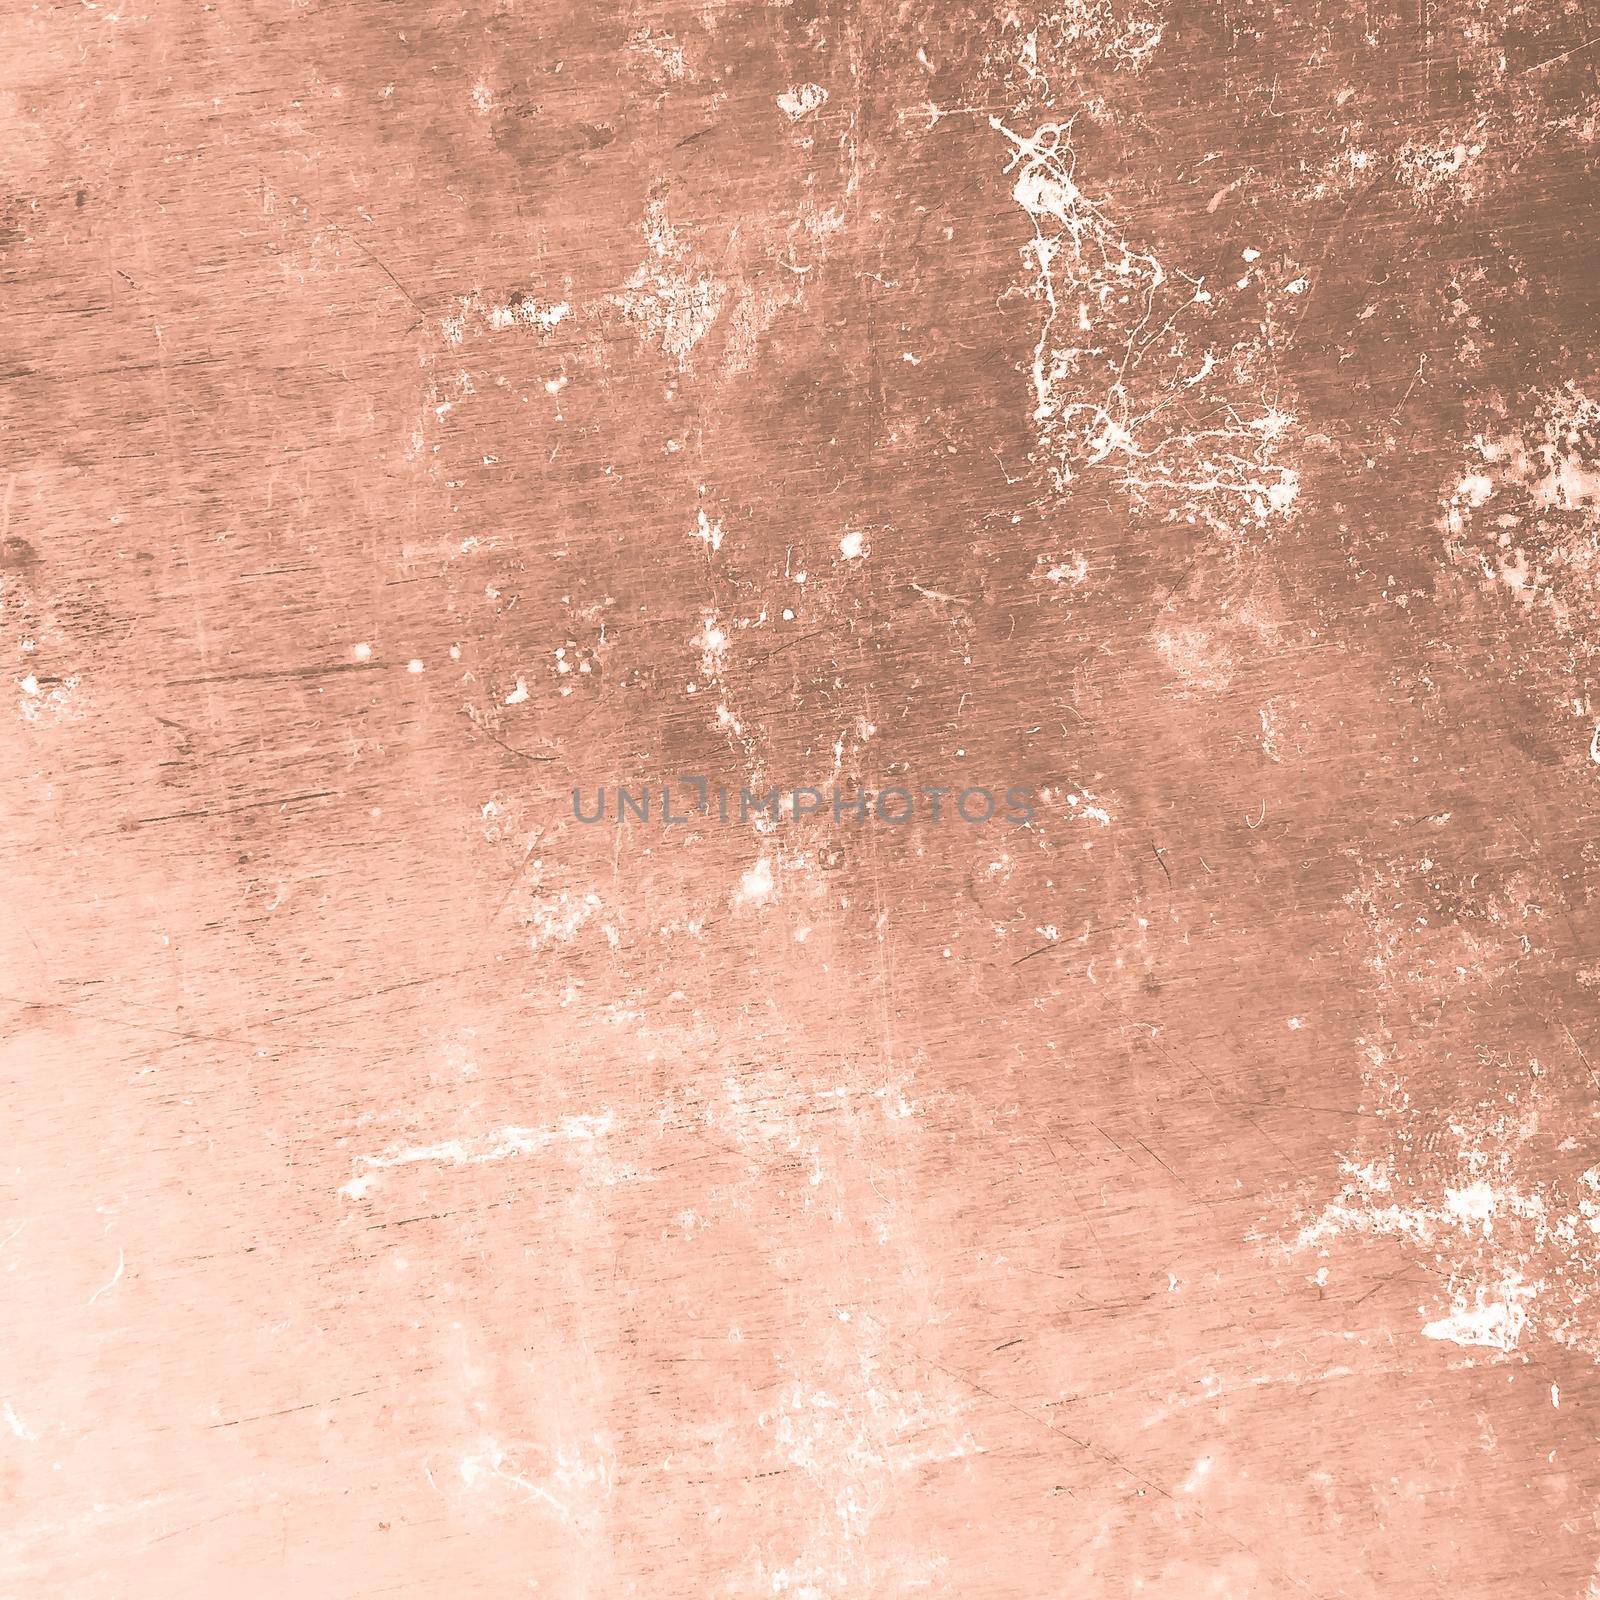 Brown grunge texture. Paint grain splatter wallpaper. Abstract scratch fabric. Distress grunge material. Retro old material. Ancient crack background. Dirty grunge surface.